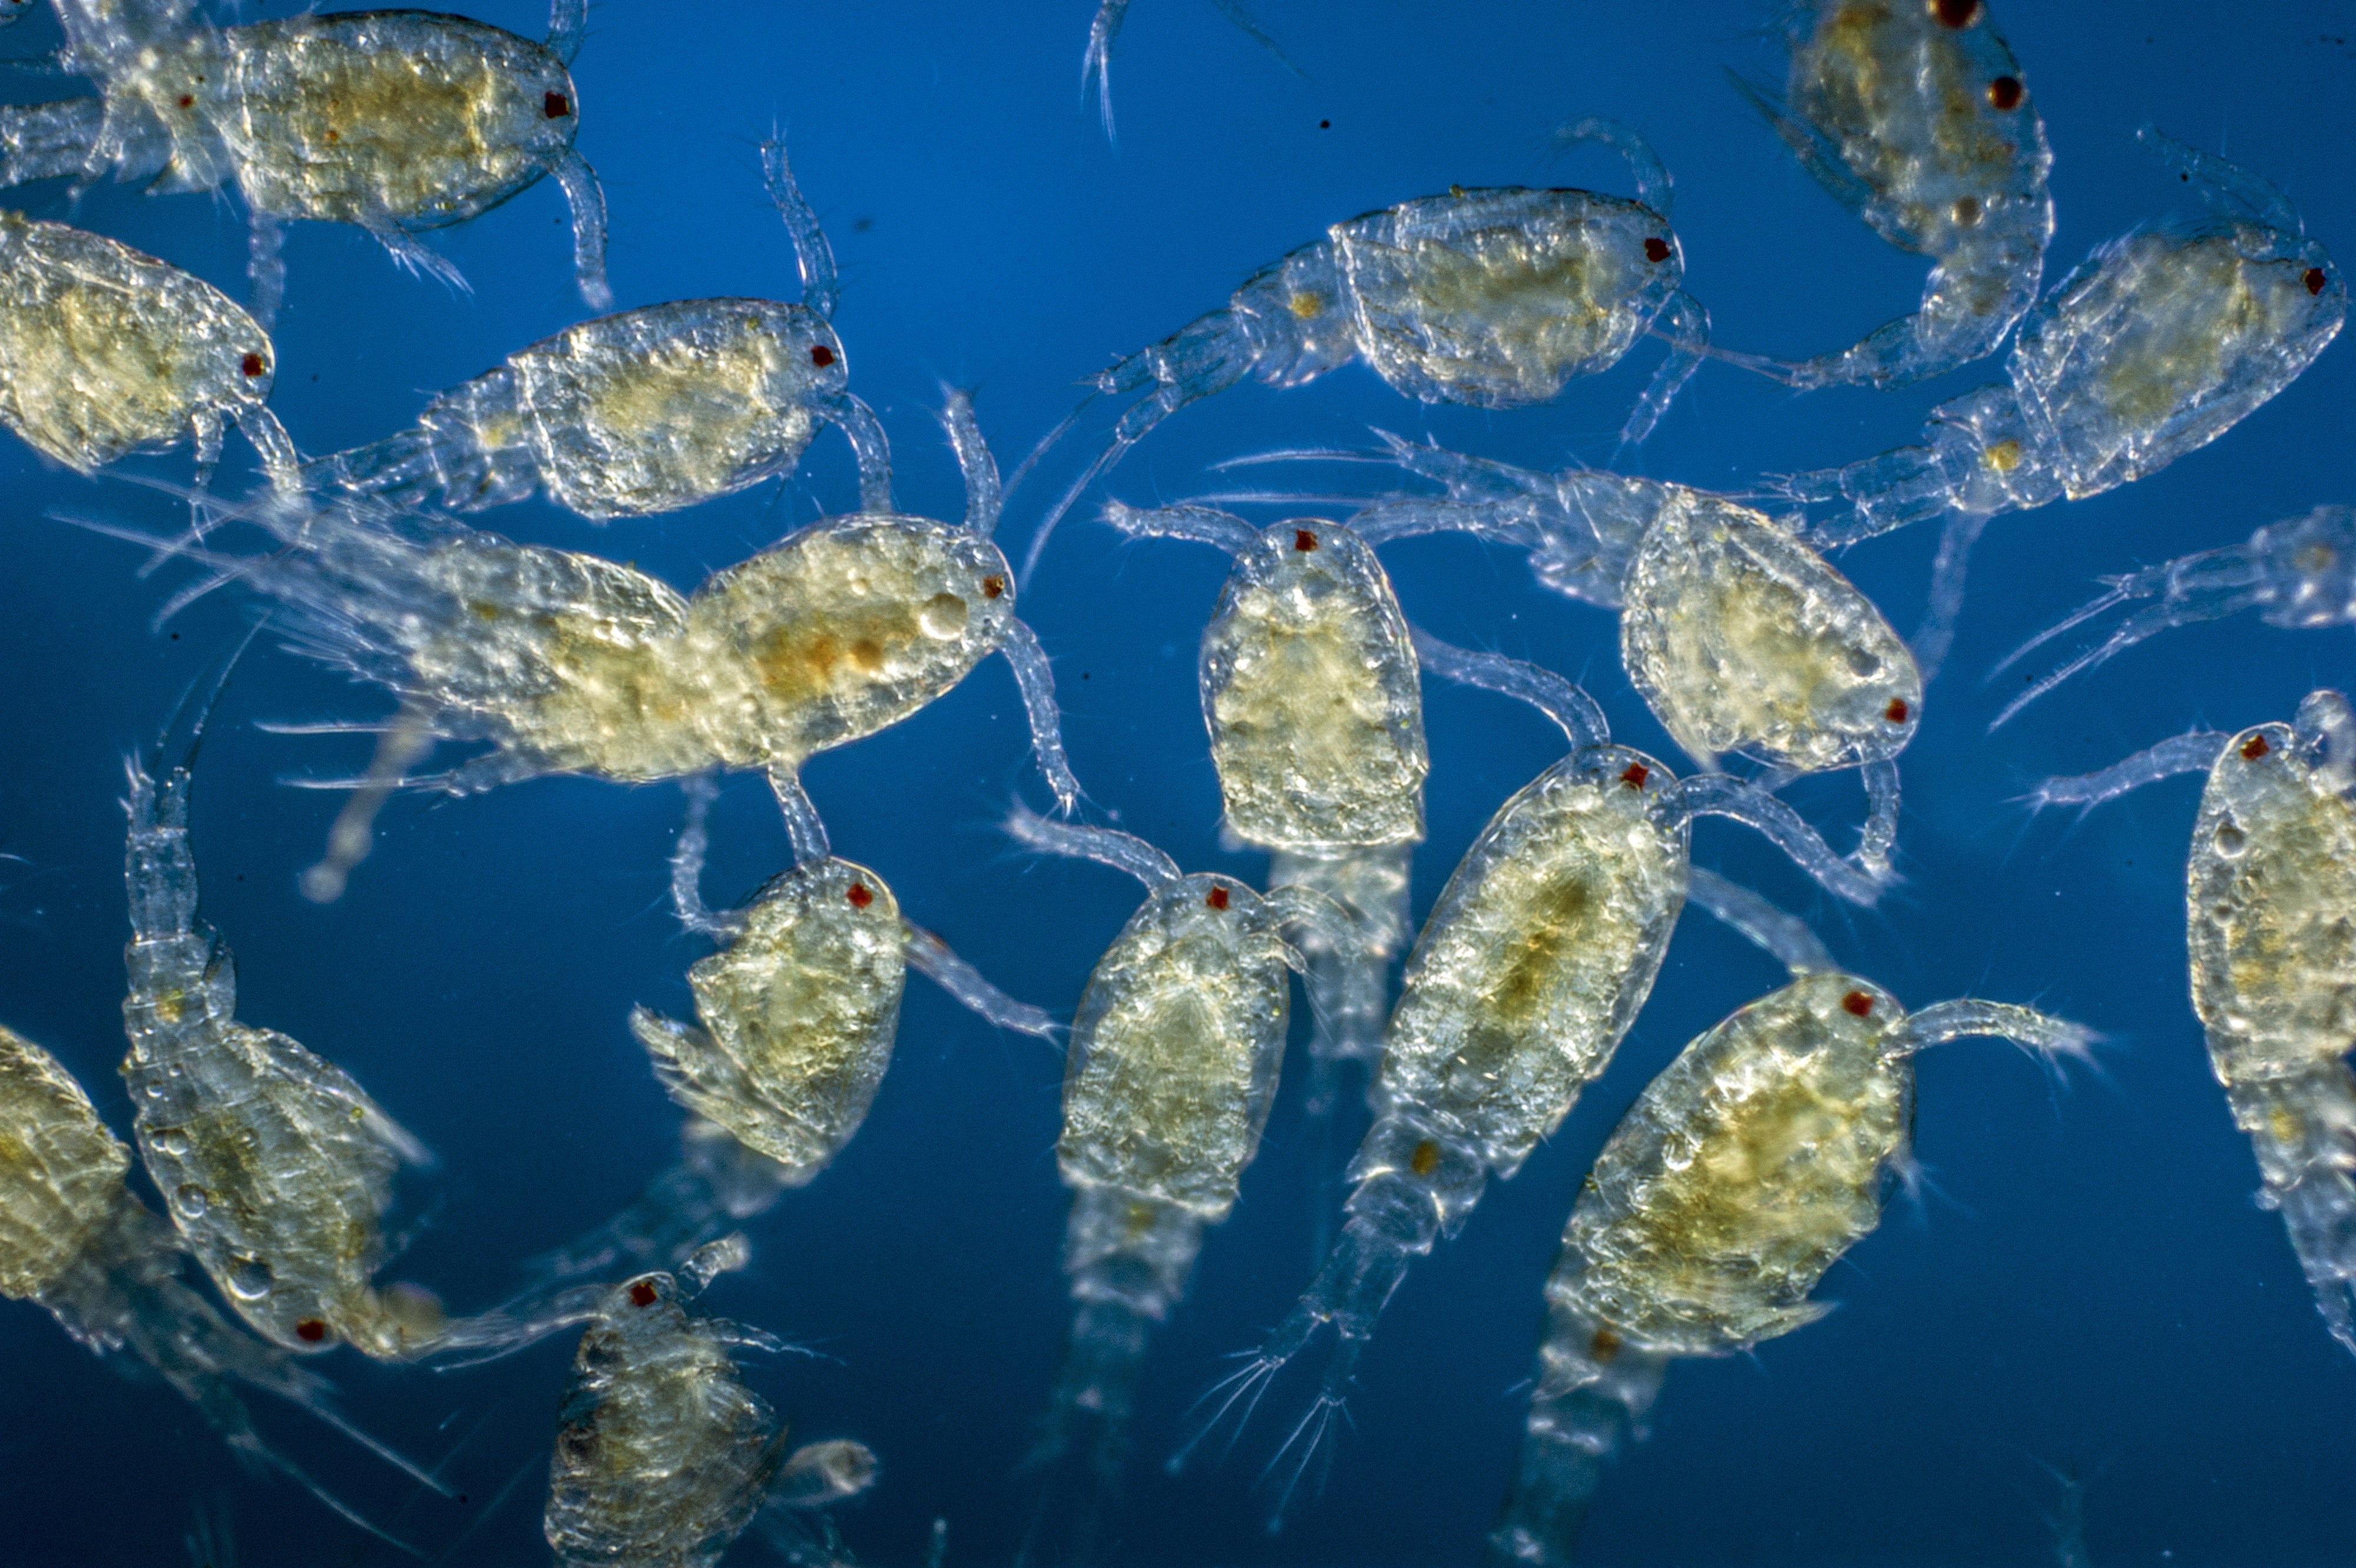 Air Guns Used in Offshore Oil Exploration Can Kill Tiny Marine Life -  Scientific American